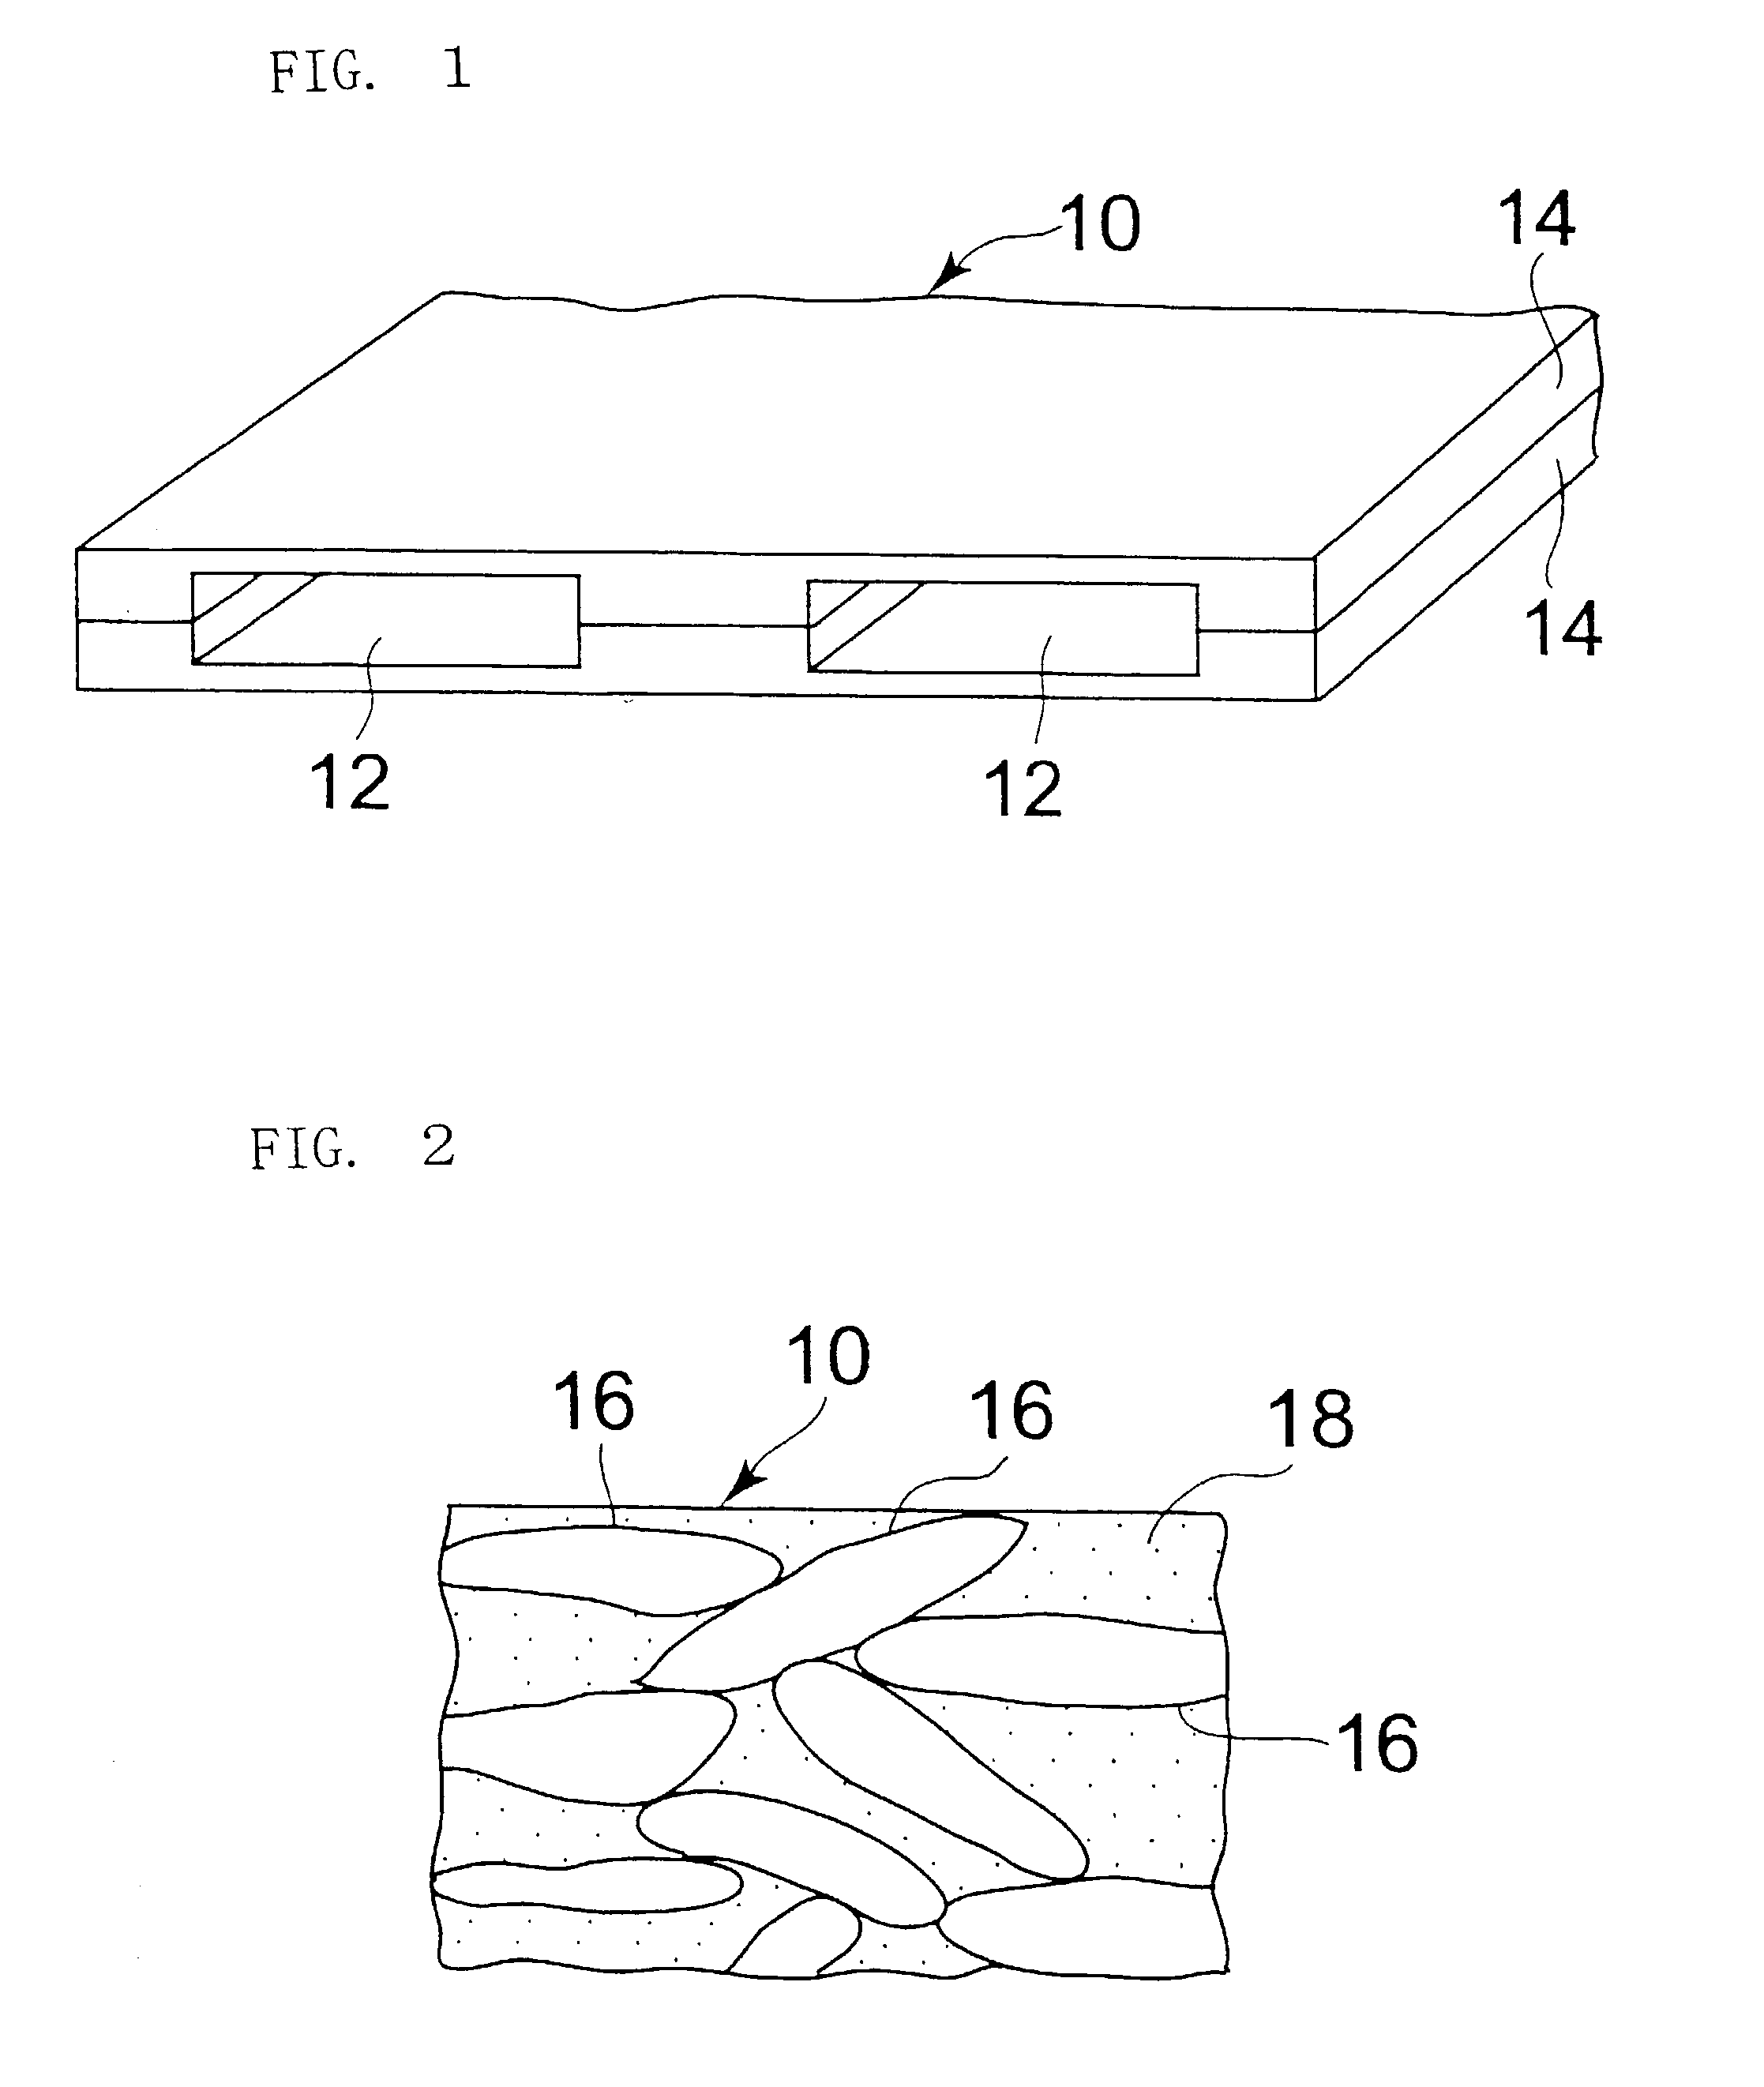 Loading and unloading pallet, forming material and method of producing it